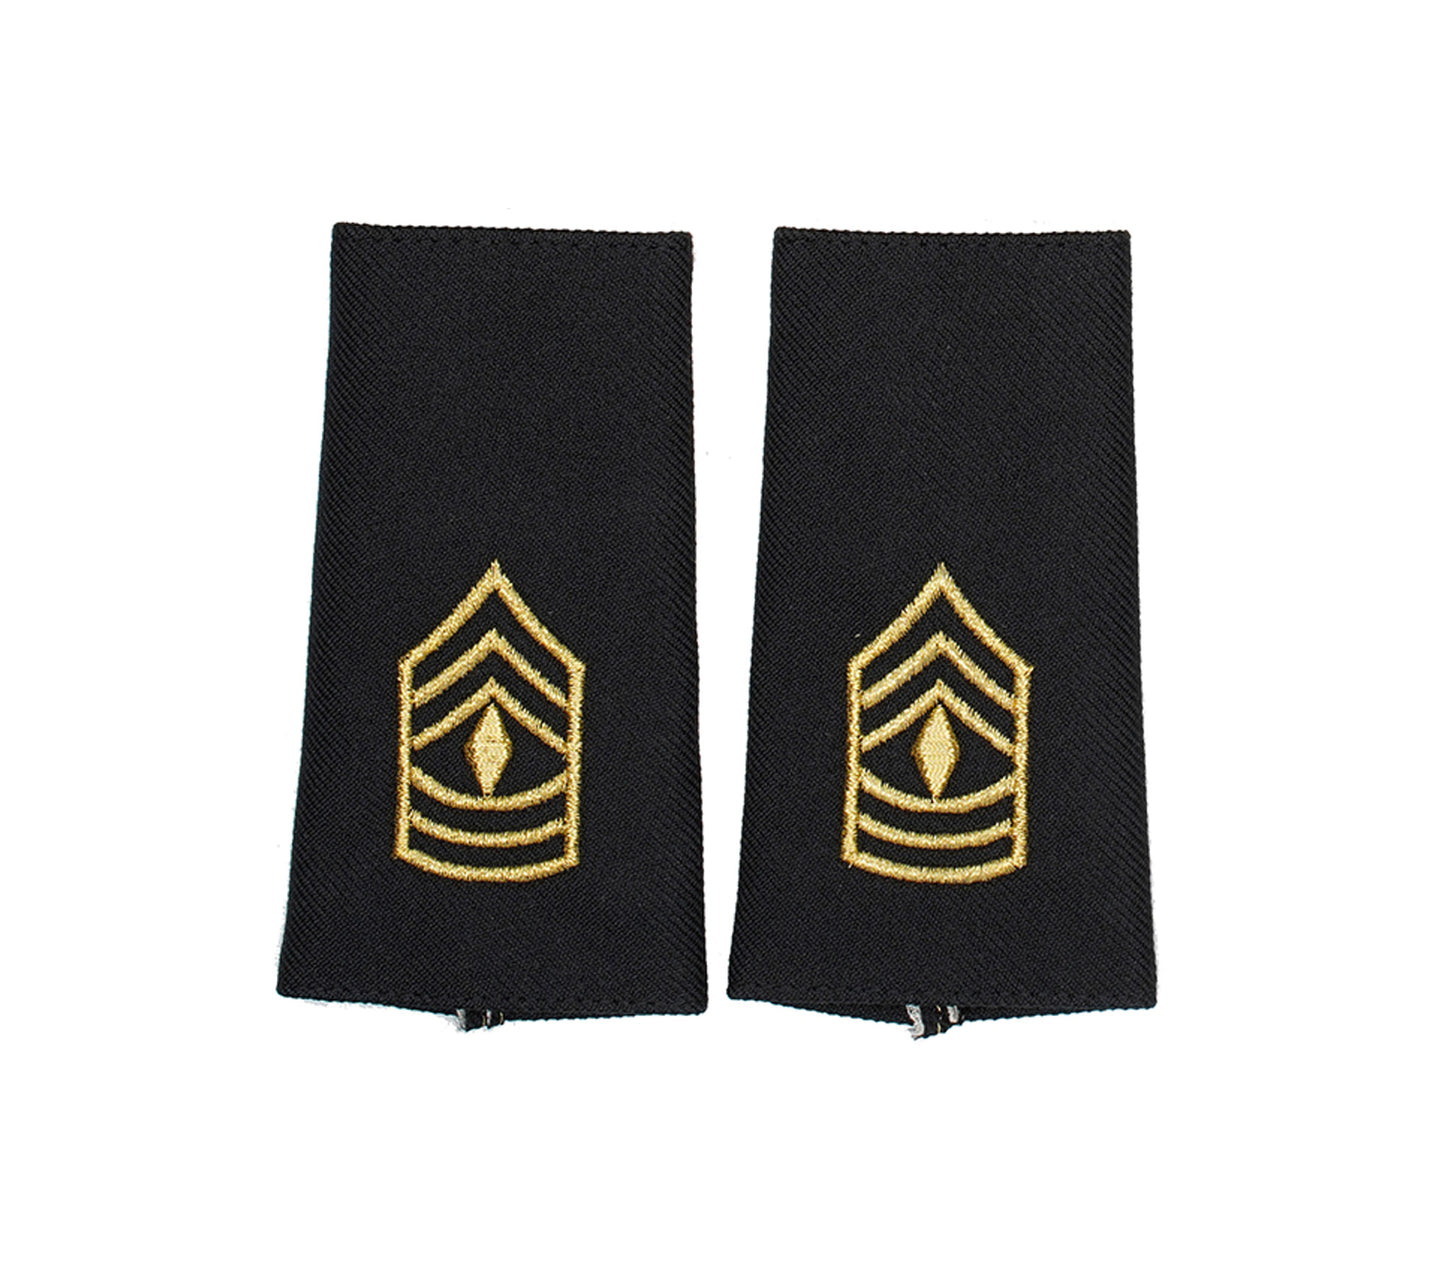 US Army E8 First Sergeant Shoulder Marks - Large/Male